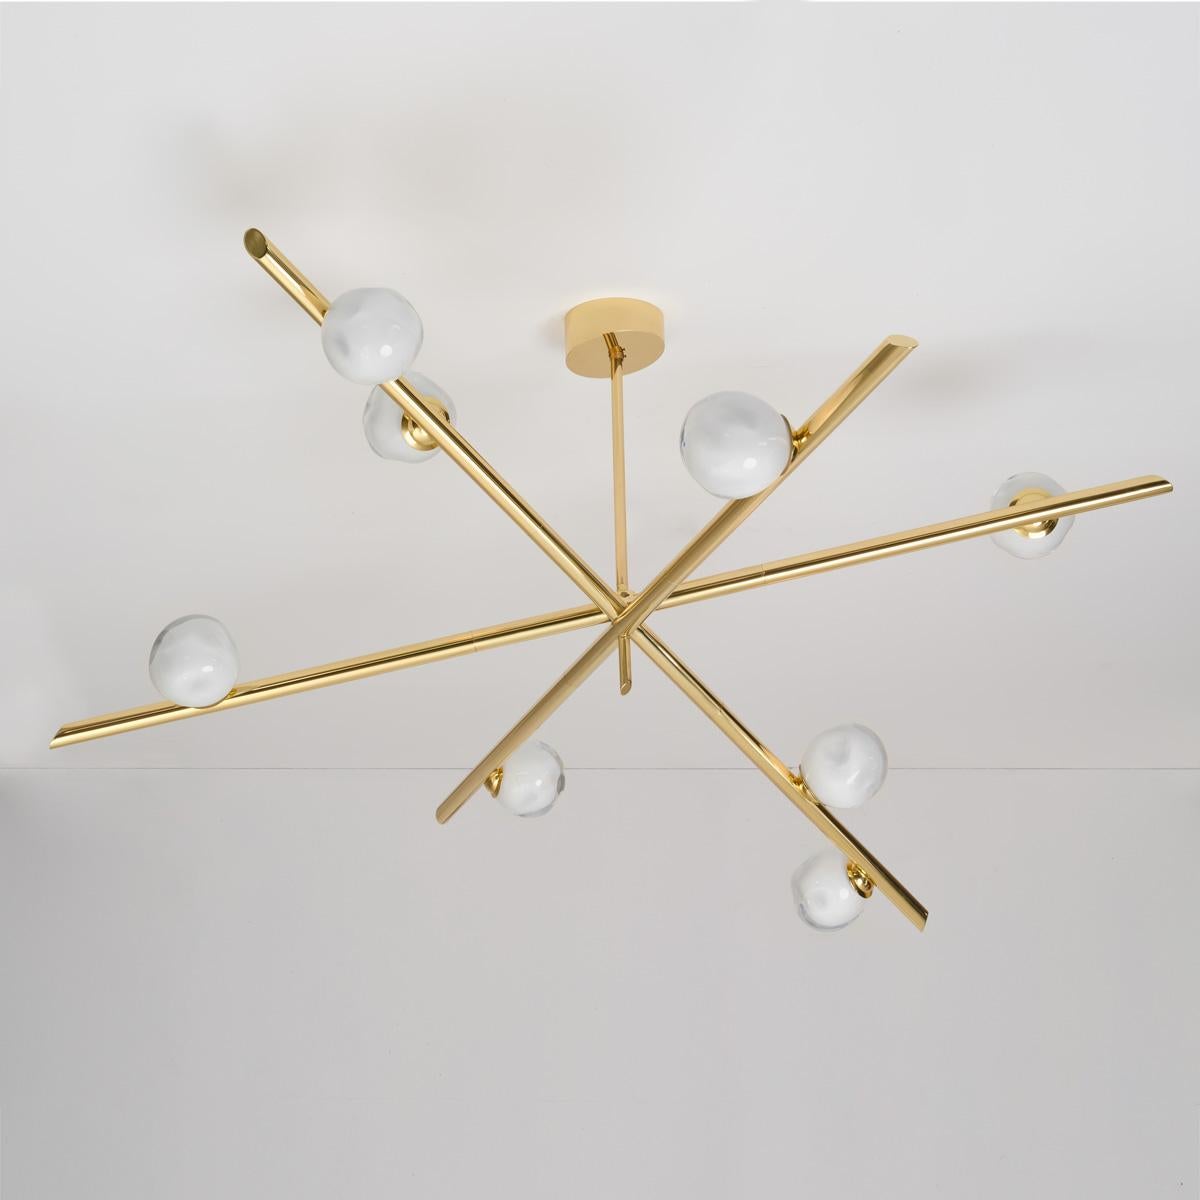 Antares X3 Ceiling Light by Gaspare Asaro-Bronze Finish In New Condition For Sale In New York, NY